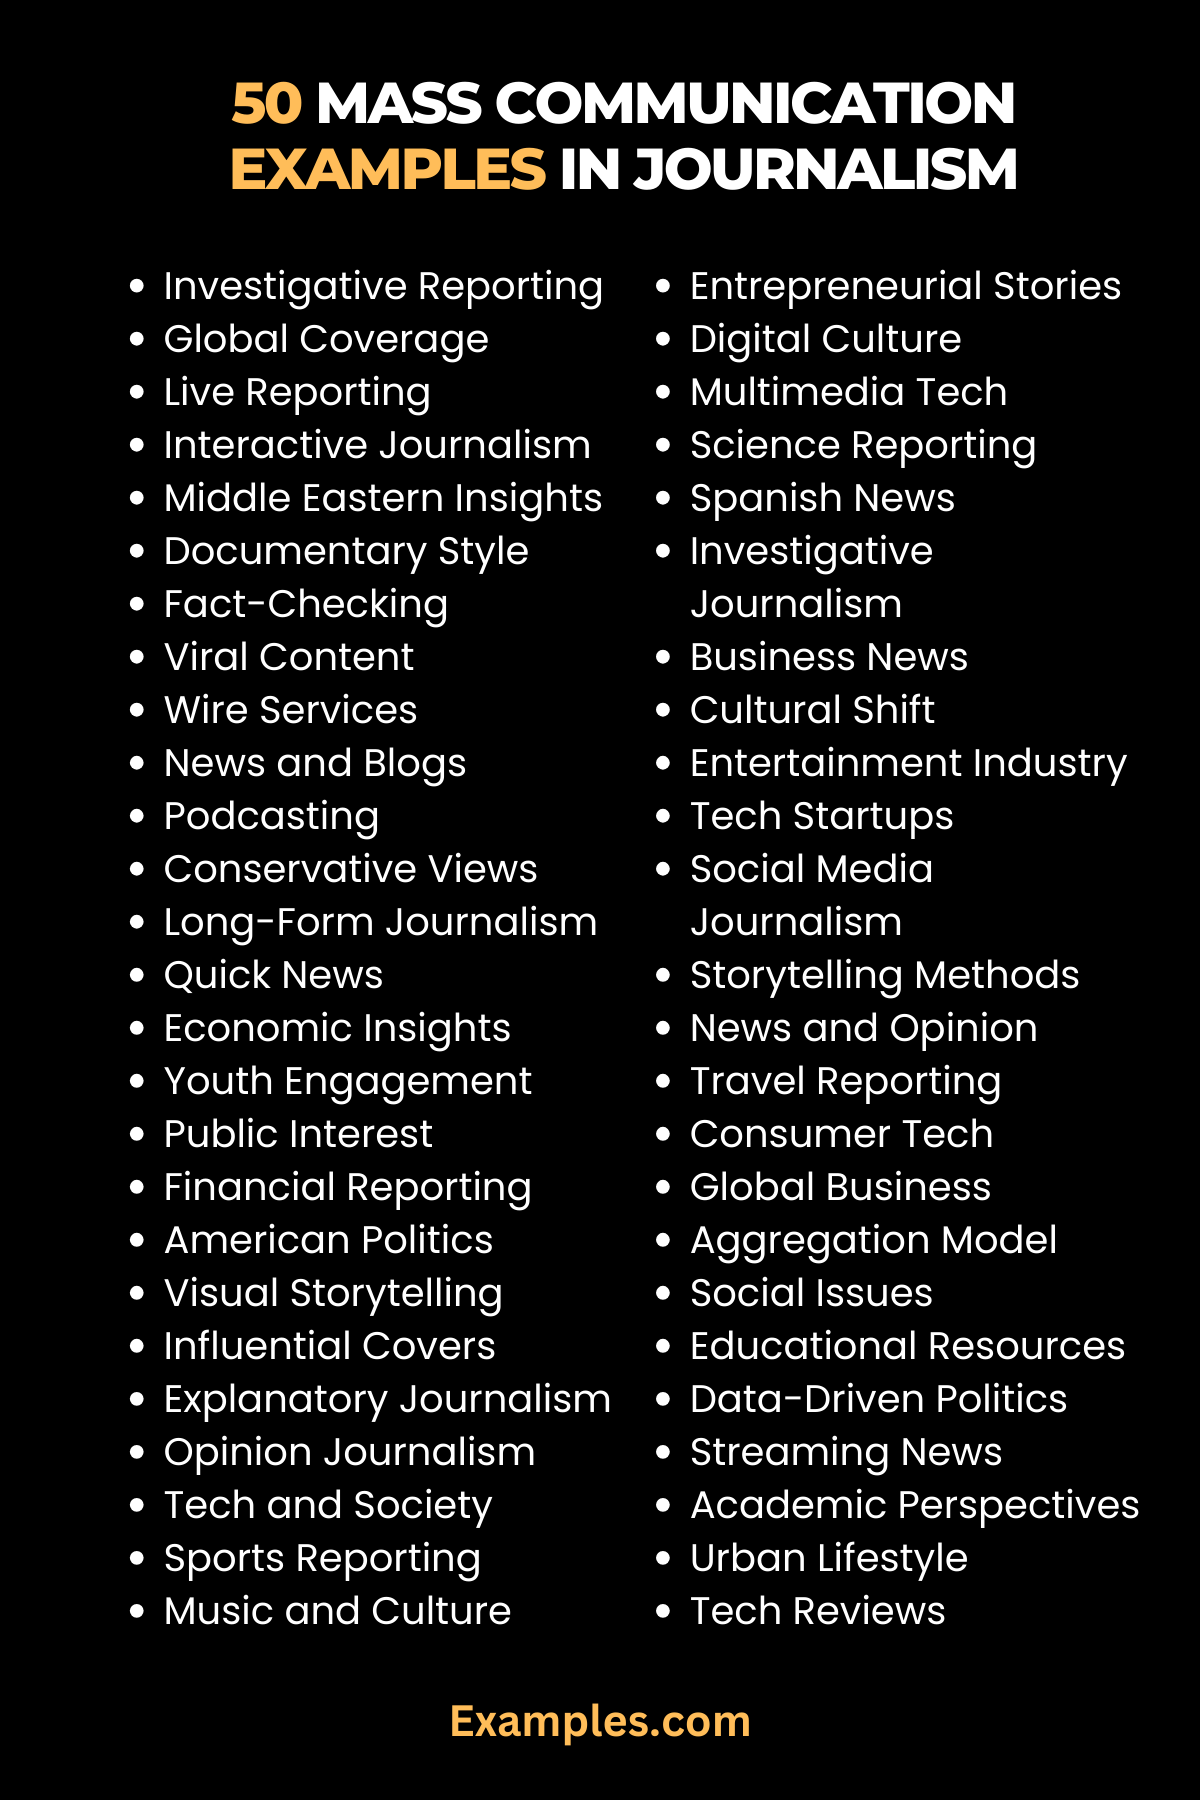 50 mass communication examples in journalism1